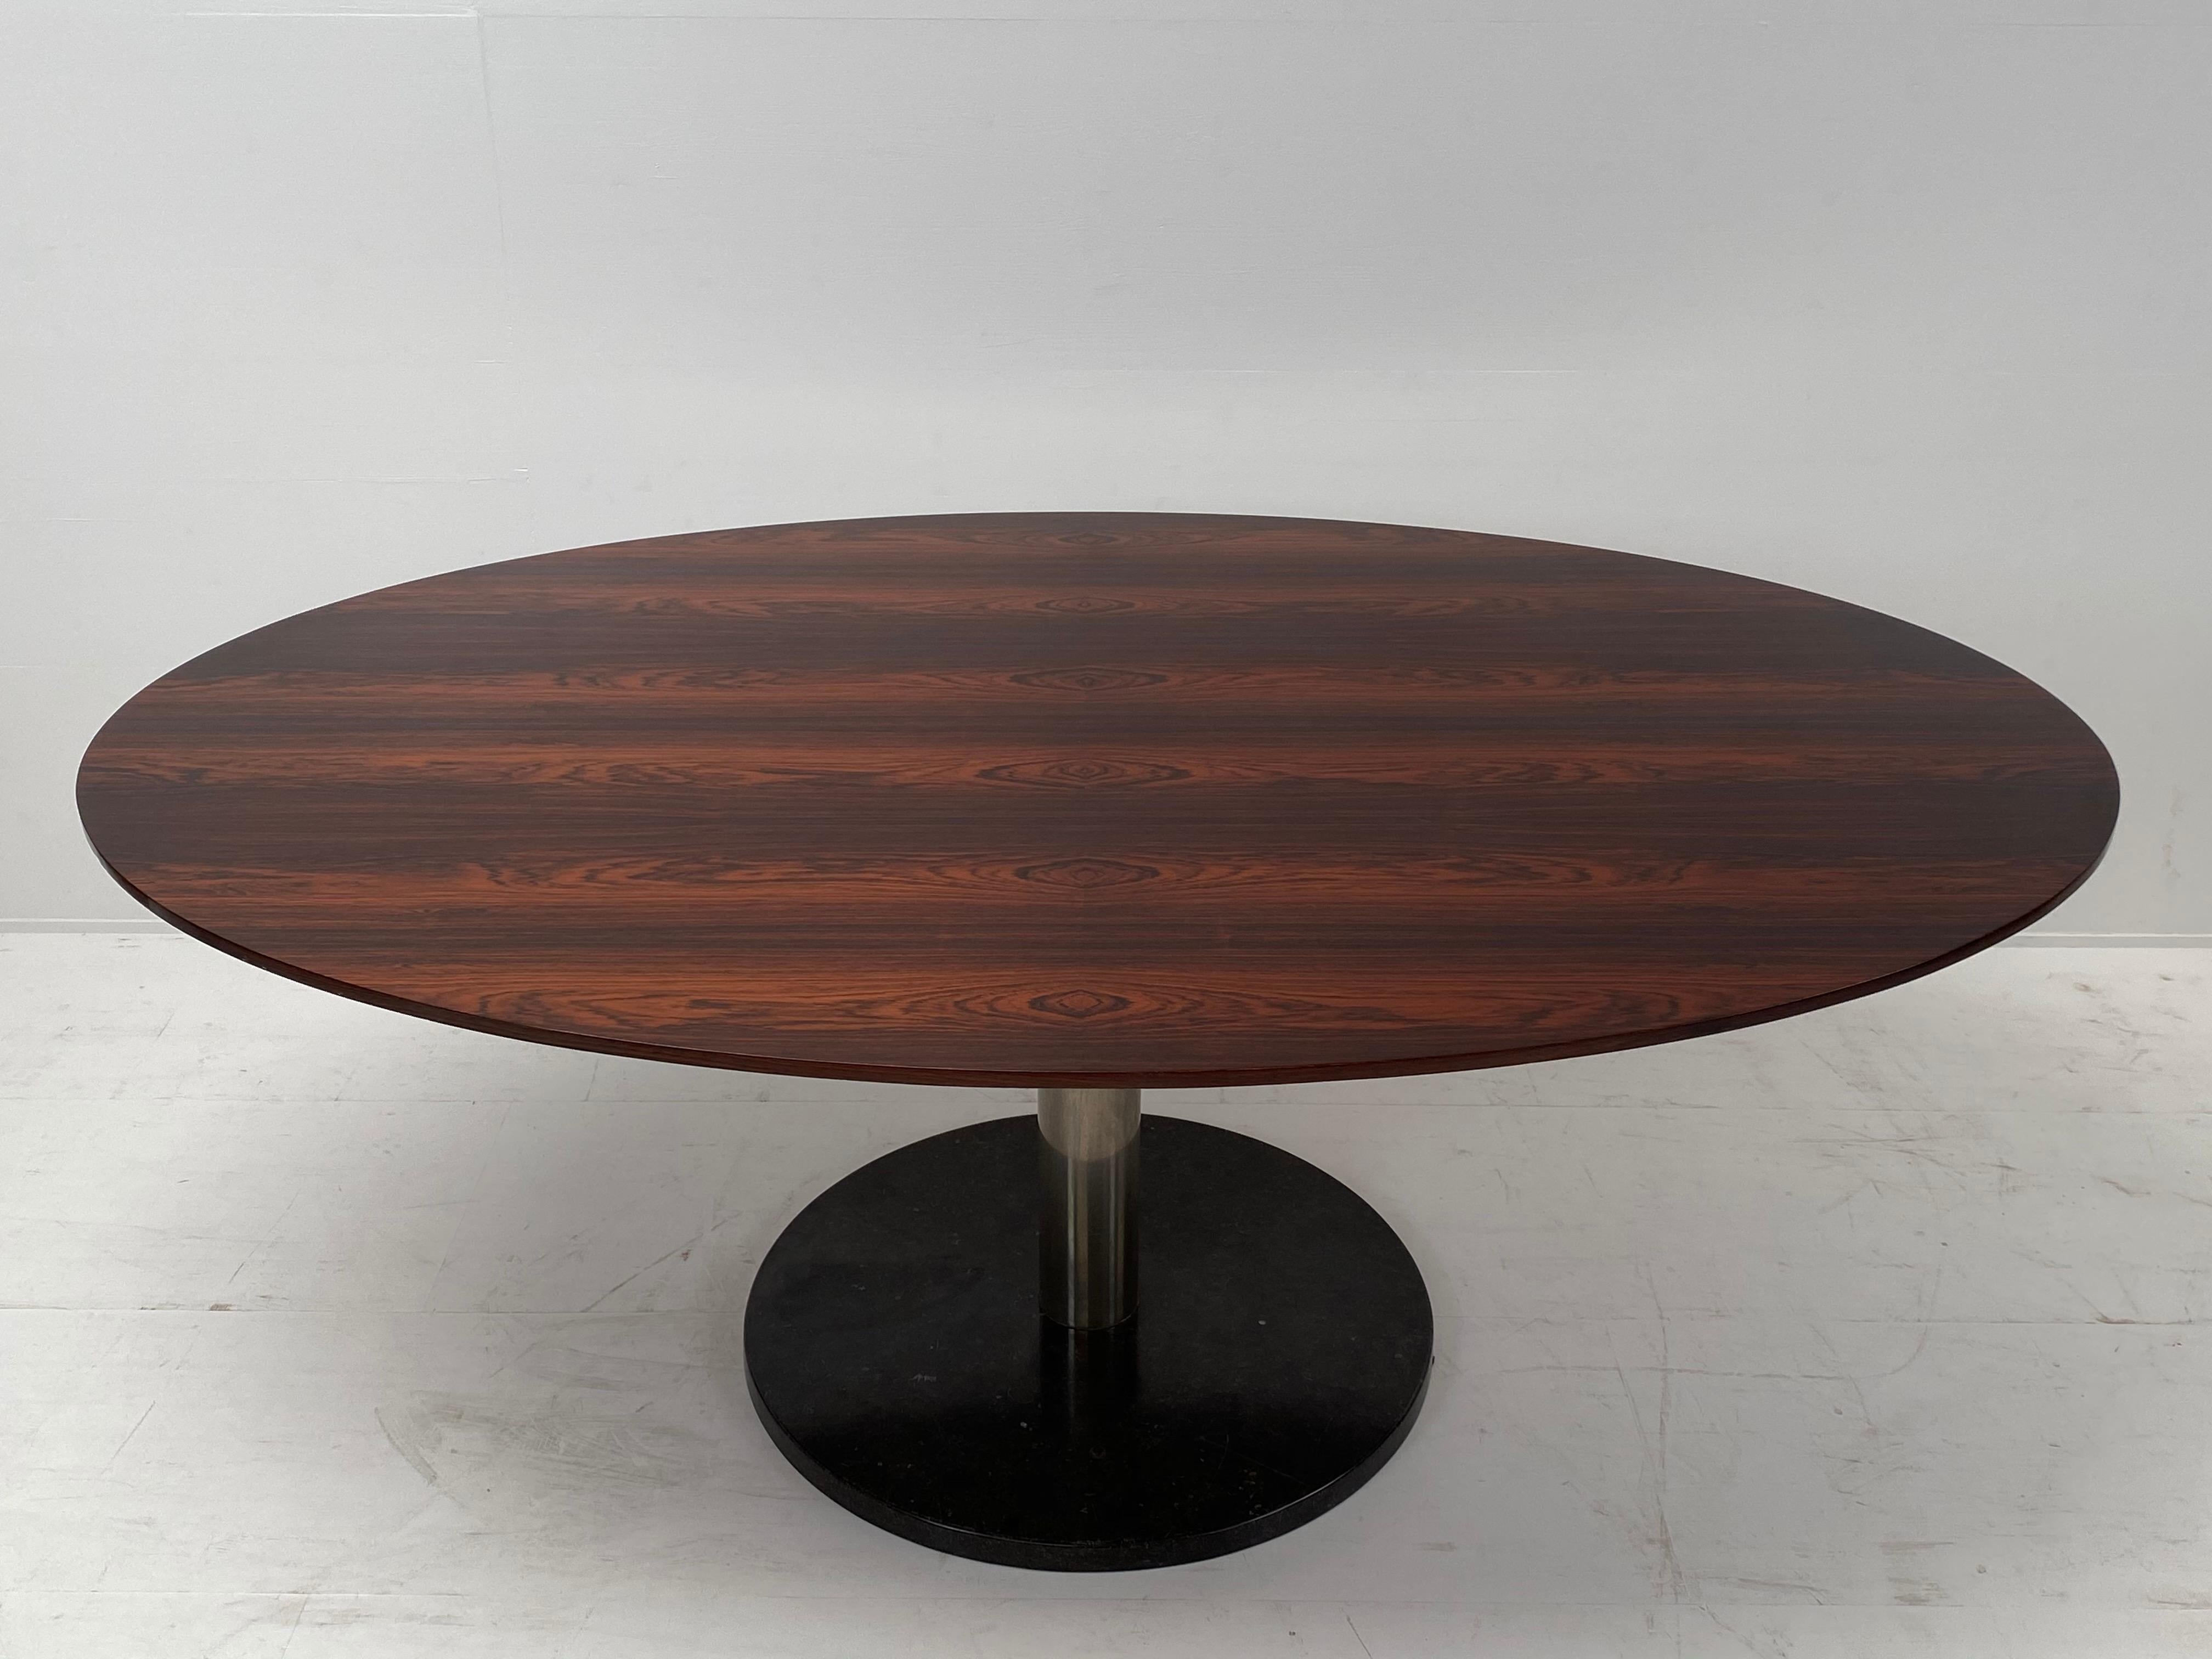 Vintage Oval Dining Table in Rosewood, Belgium by Alfred Hendrickx In Good Condition For Sale In Schellebelle, BE